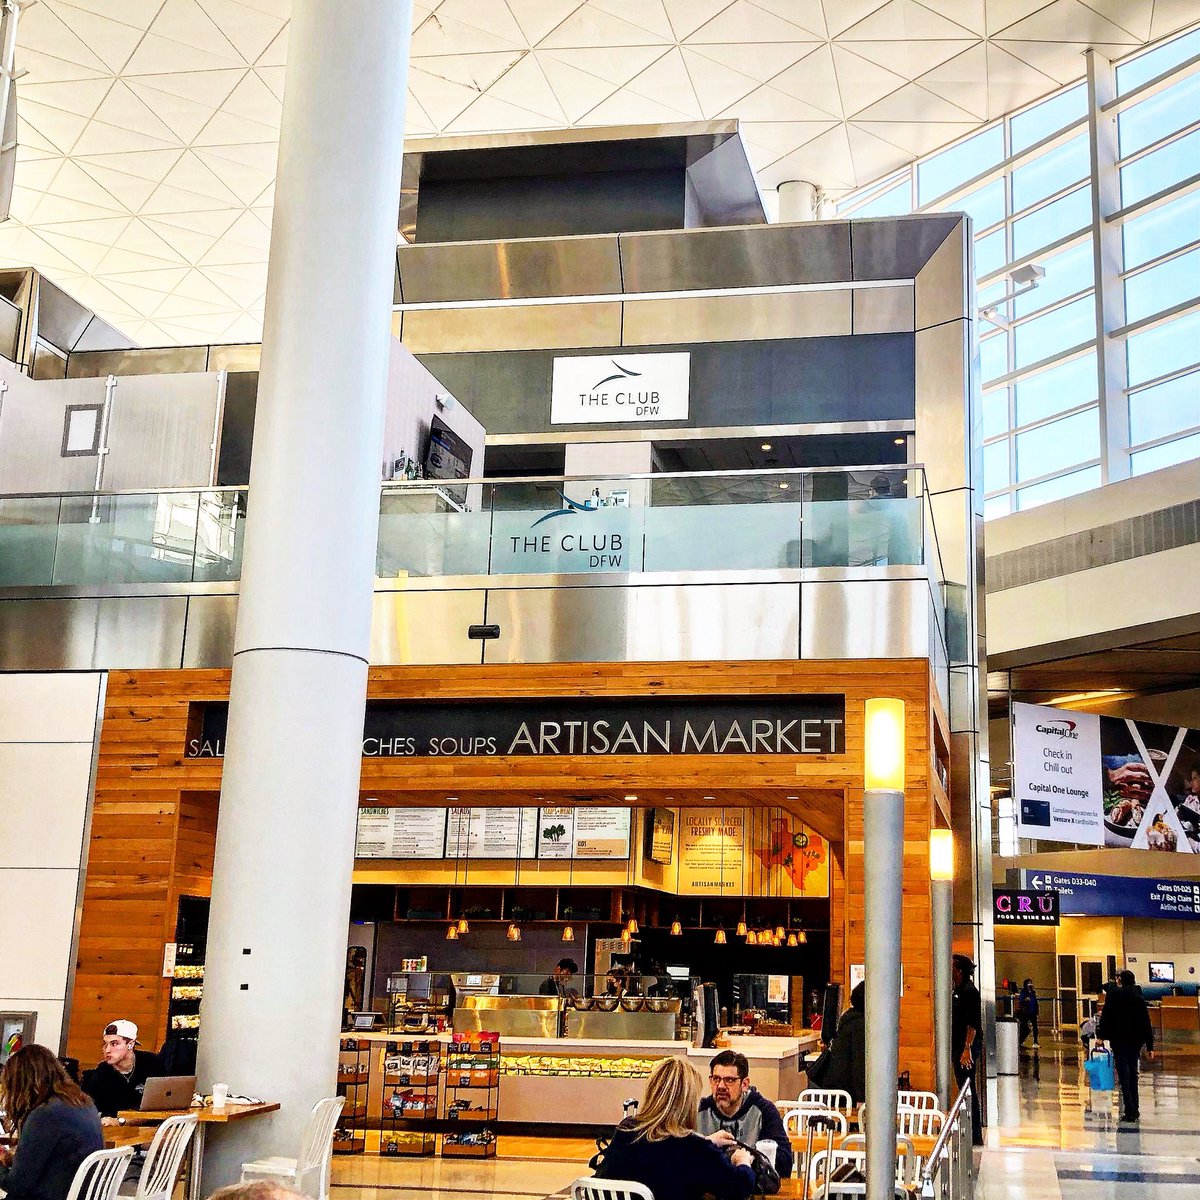 The Club DFW Terrace… 
#travel #prioritypass #airport #frequentflyer #workflow #travelblogger #amex #skymileslife #lux #weekendvibes #airportlife #businesstravel #dfwairport #dallas #texas